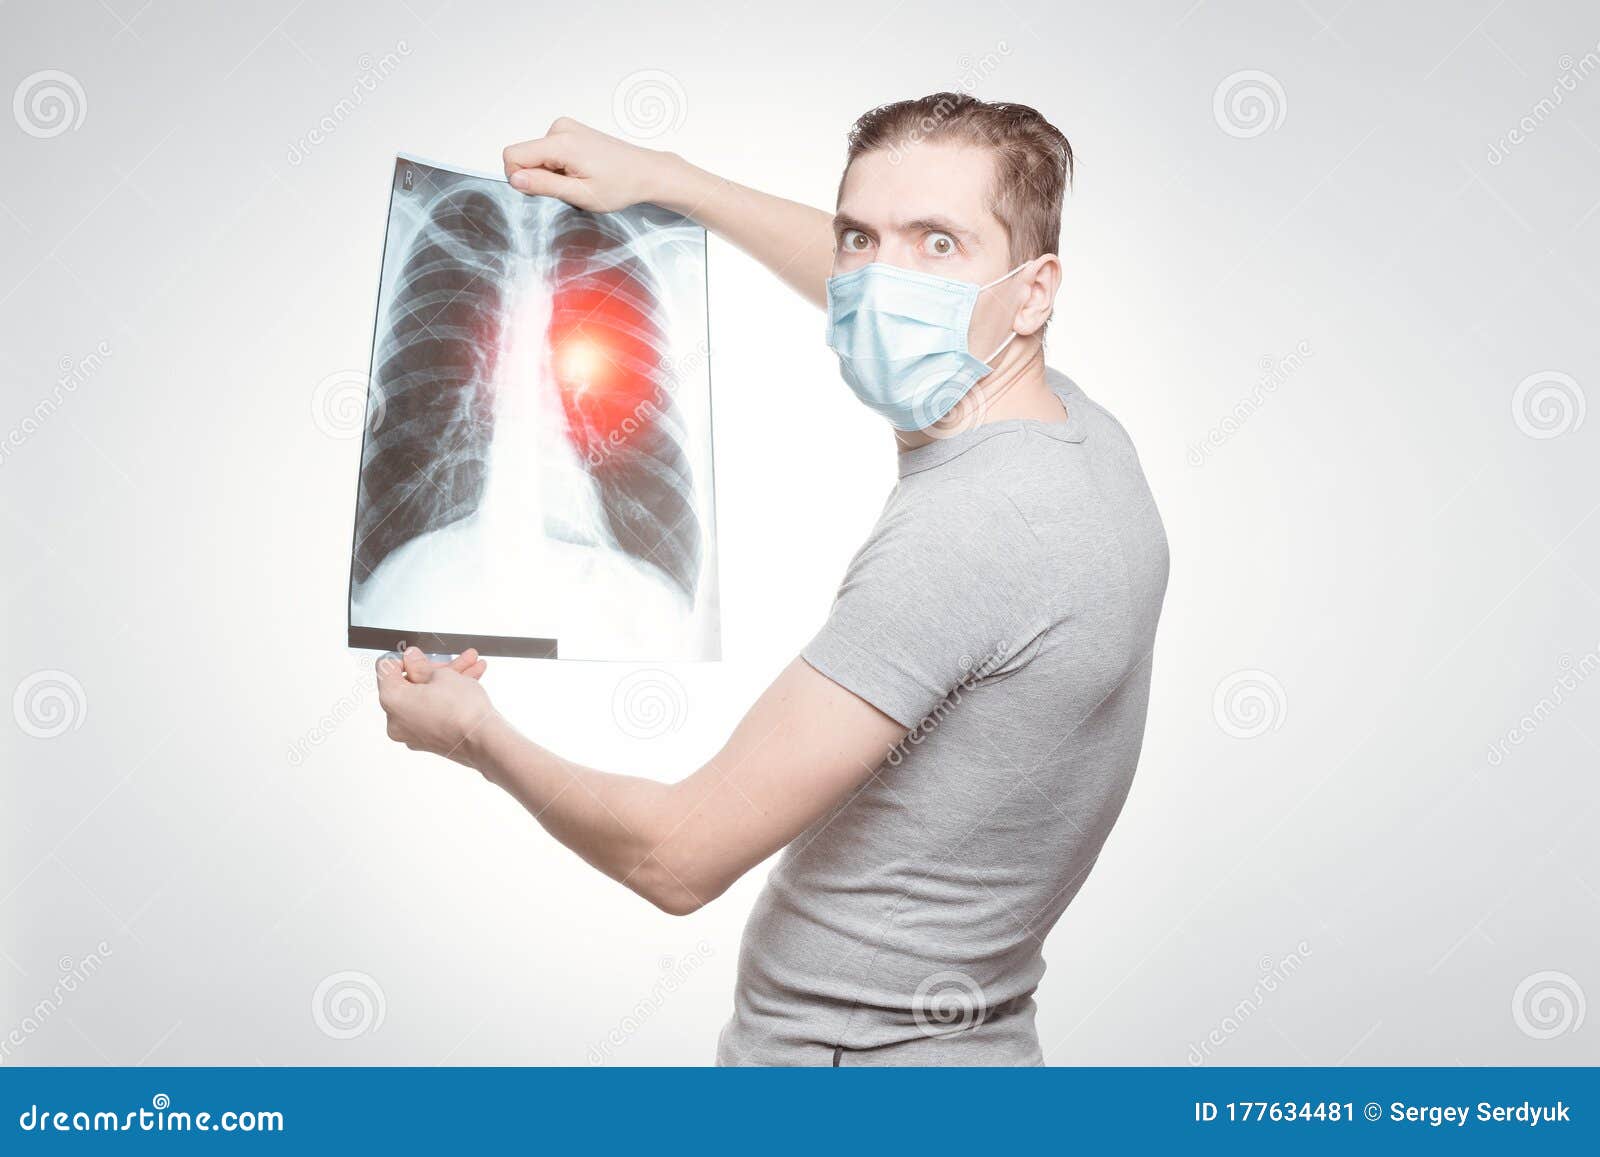 shocked man in mask holds his x-ray and analyze it, infected person. epidemia coronavirus. covid -19